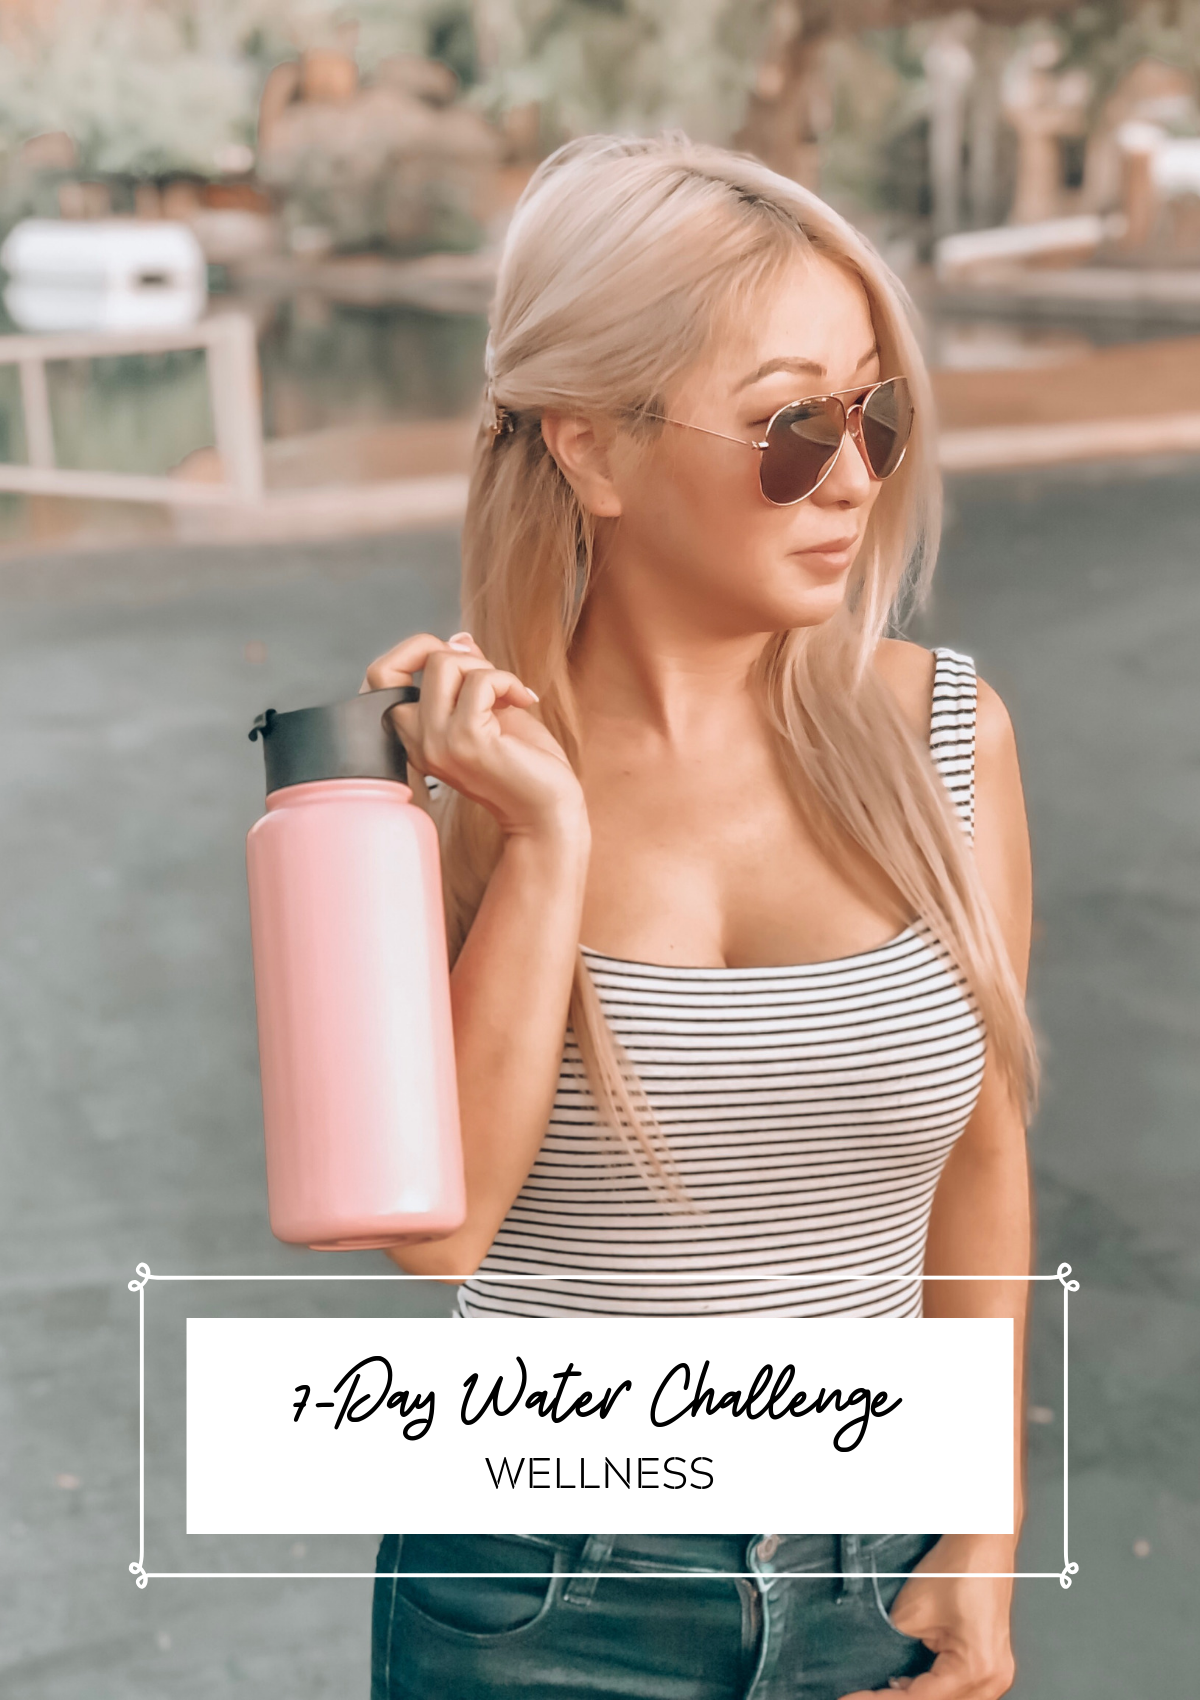 7 day Water Challenge